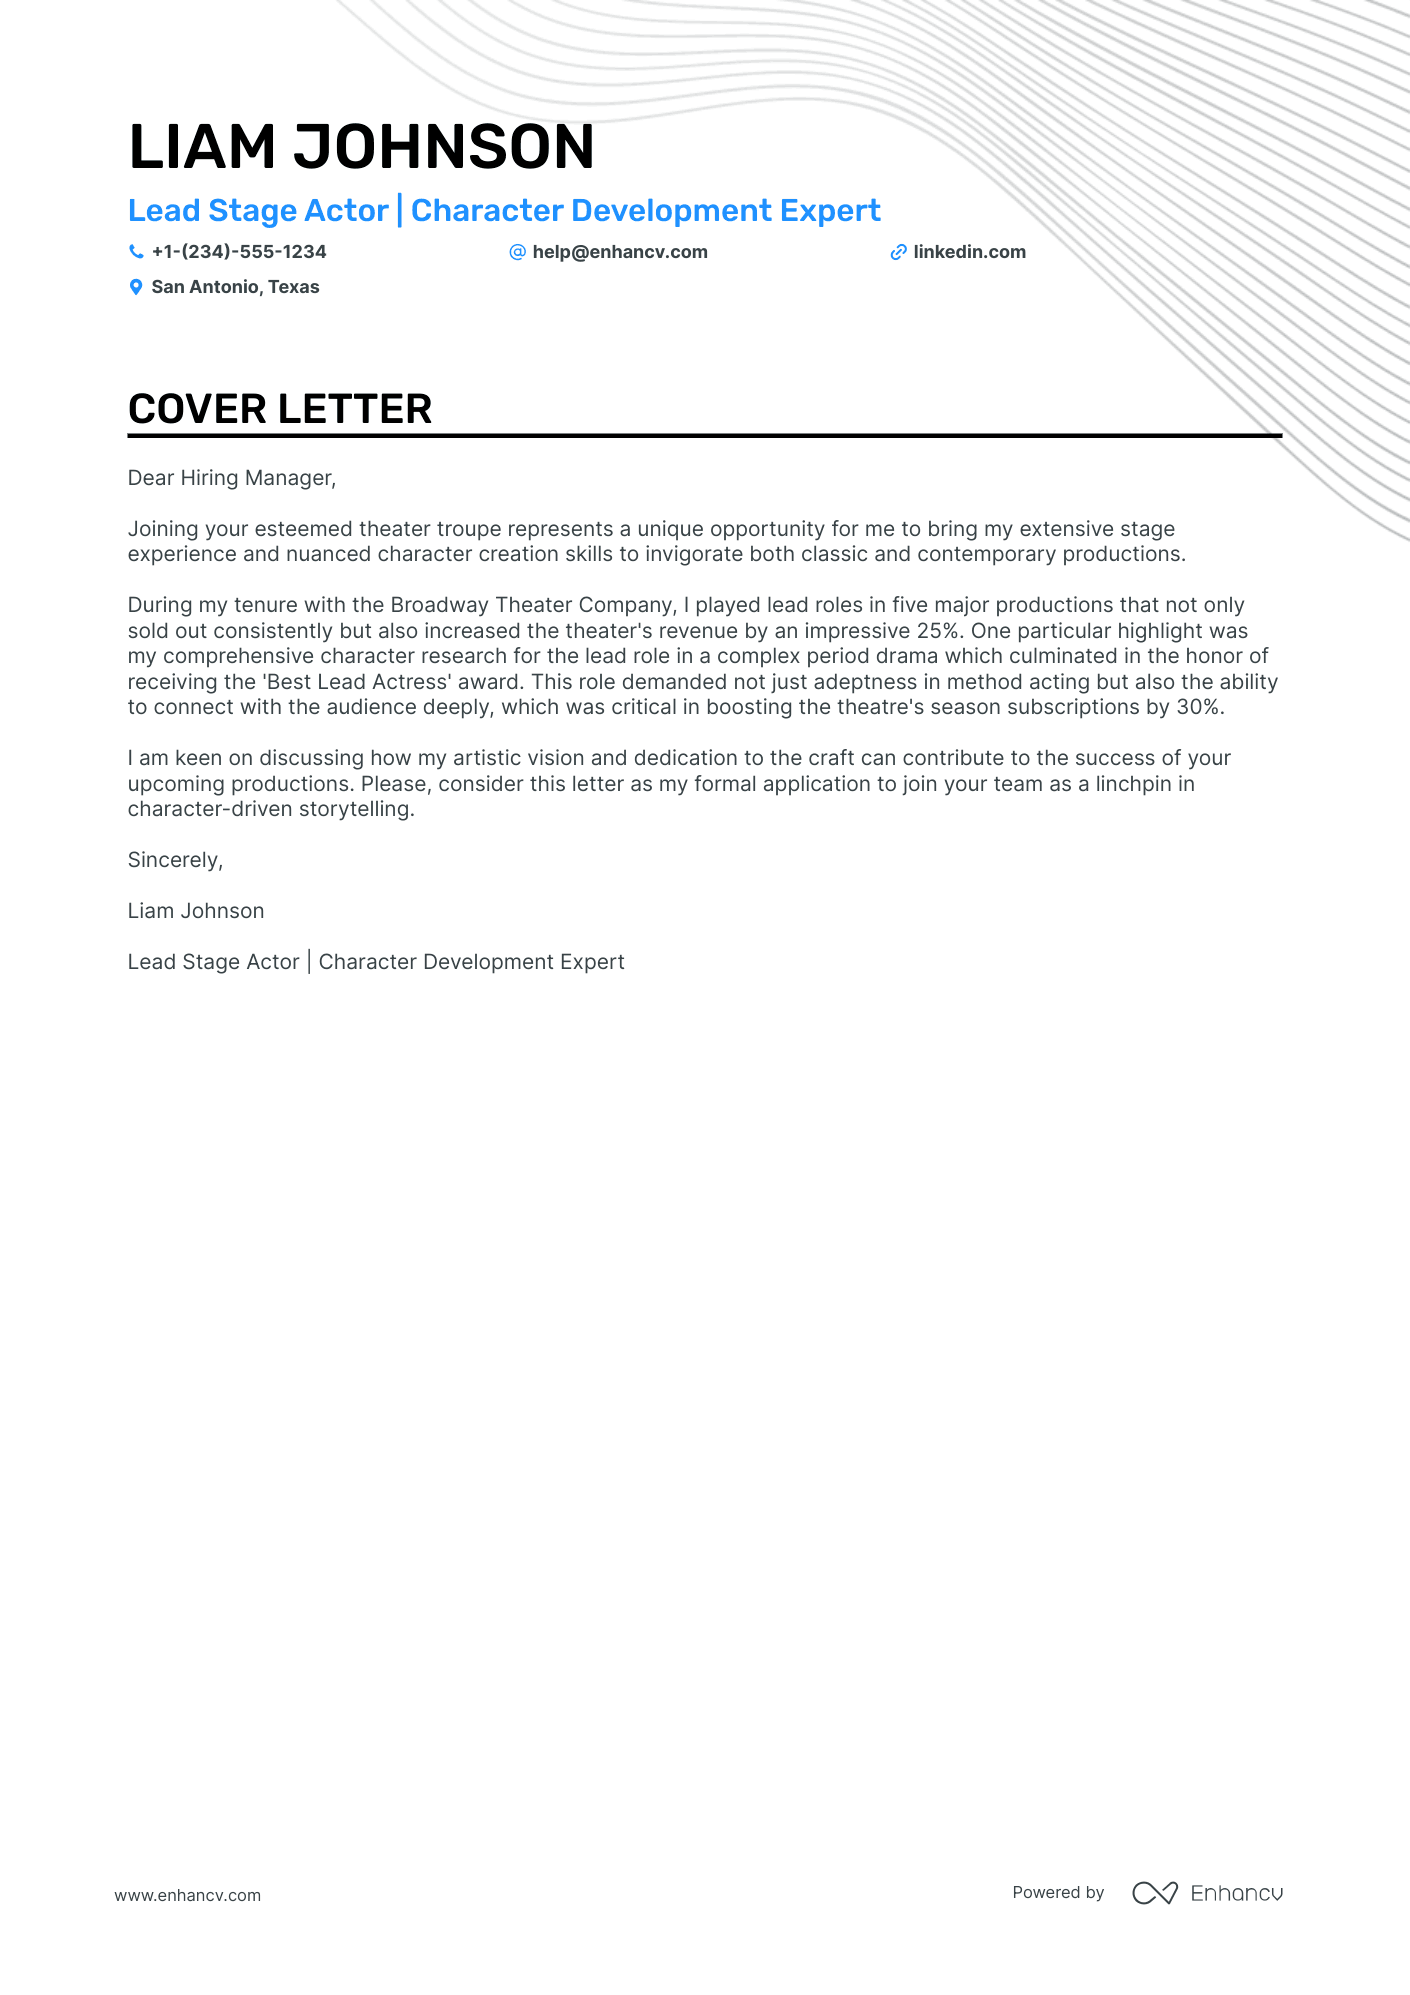 Film Actor cover letter